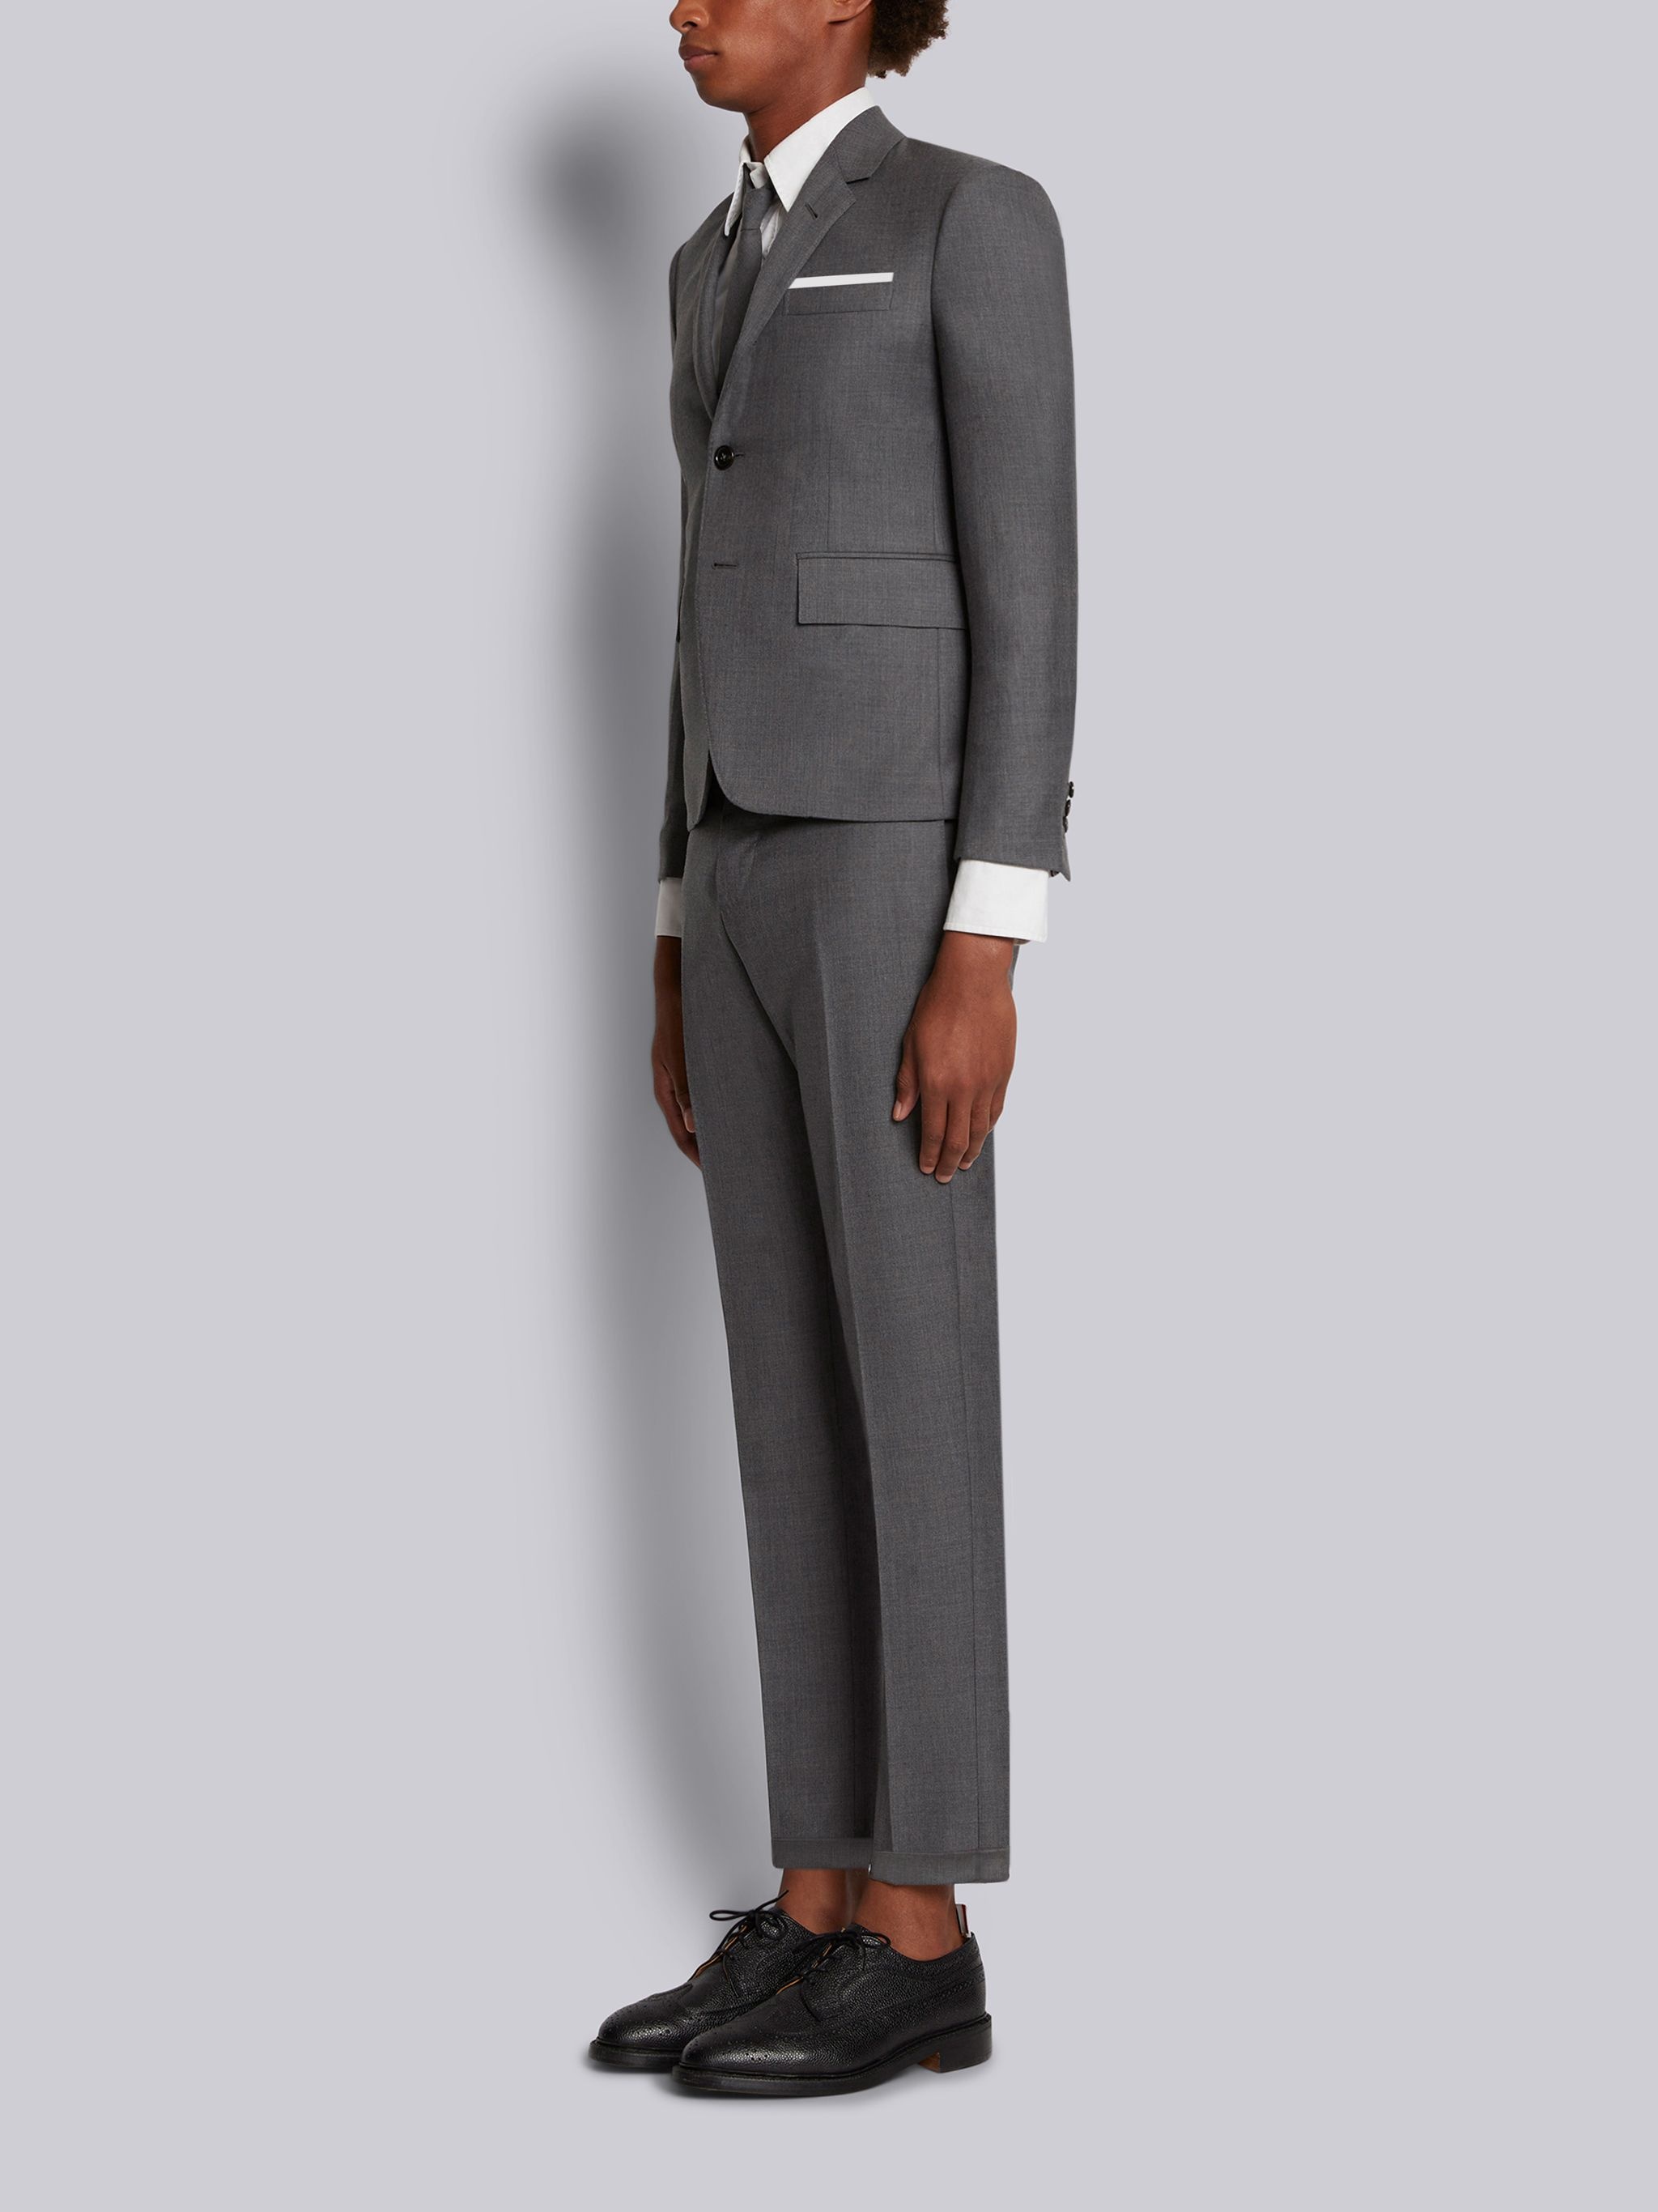 Medium Grey Super 120s Twill High Armhole Suit With Tie And Low Rise Skinny Trouser - 2